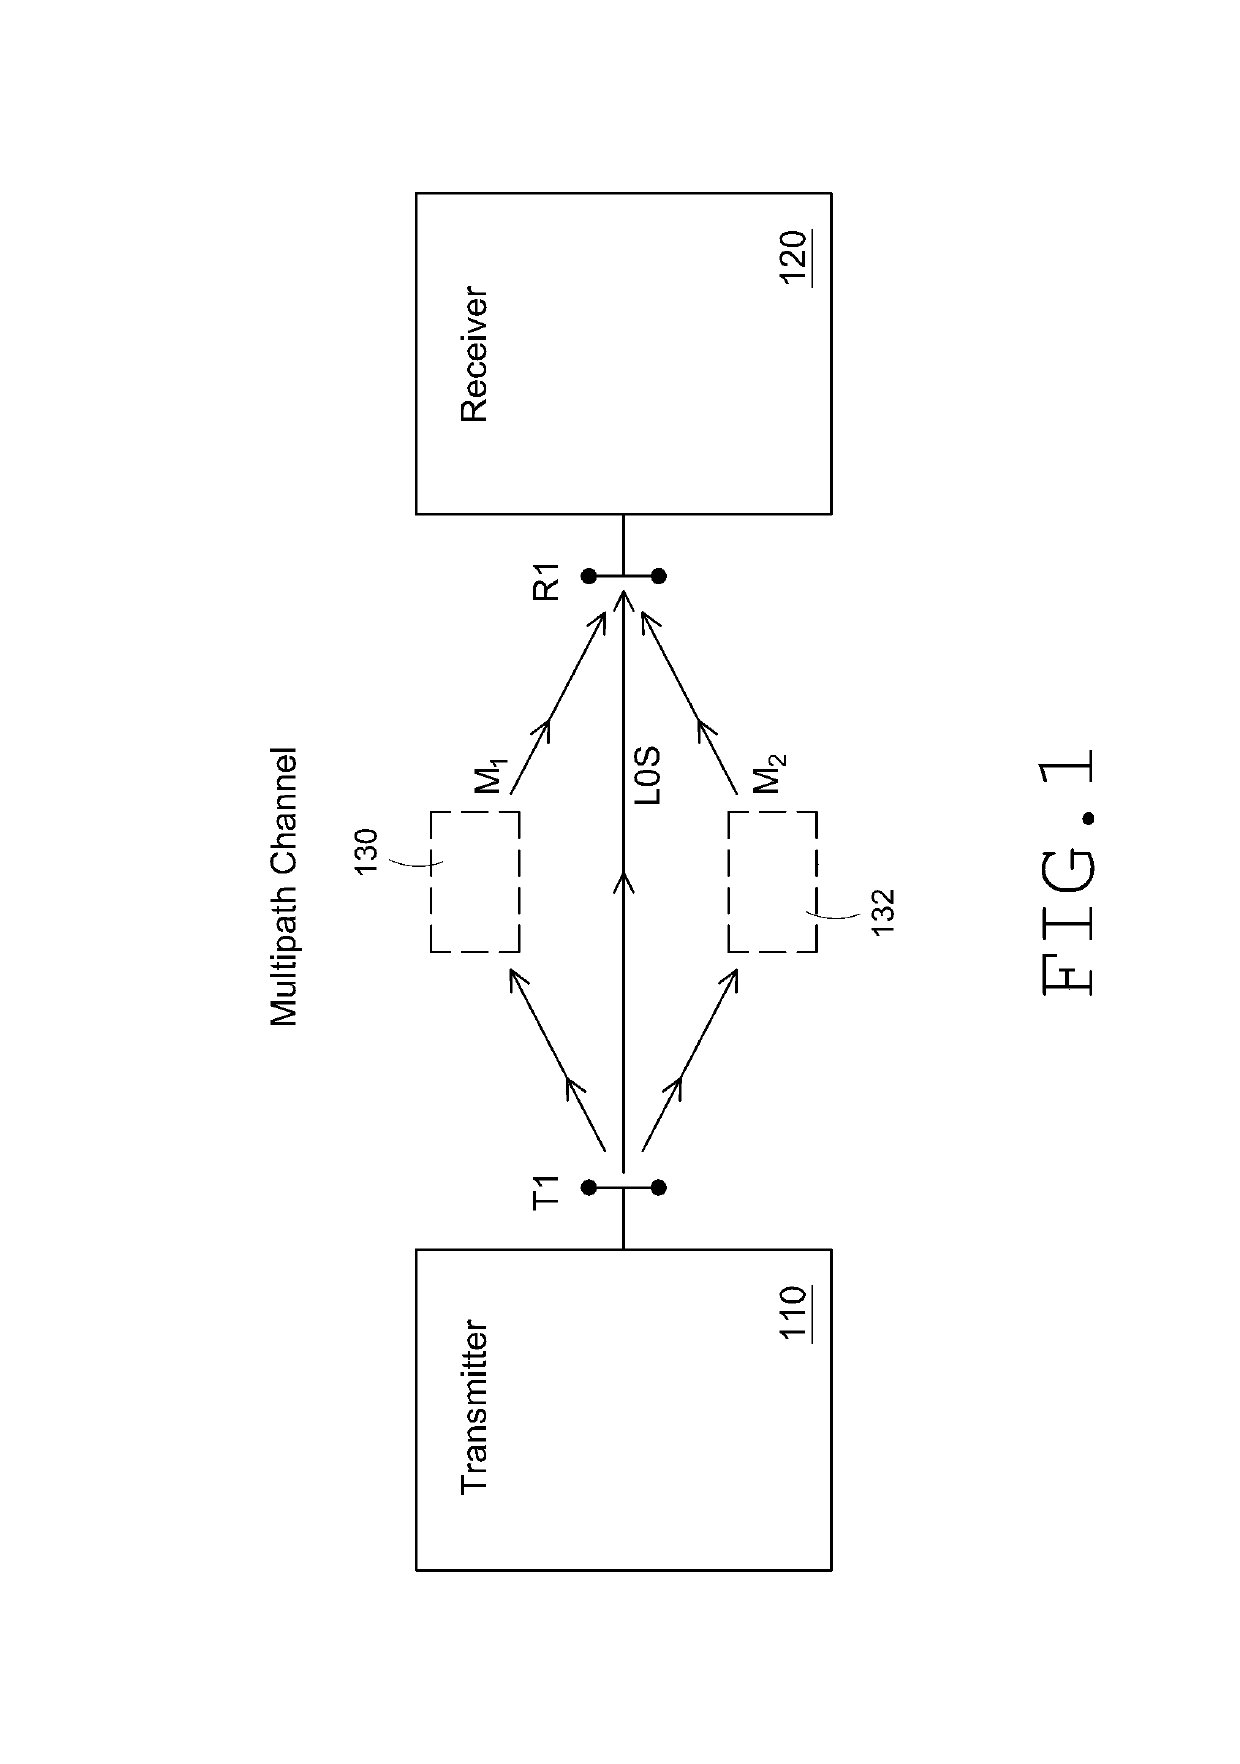 Monitoring rotating machinery using radio frequency probes